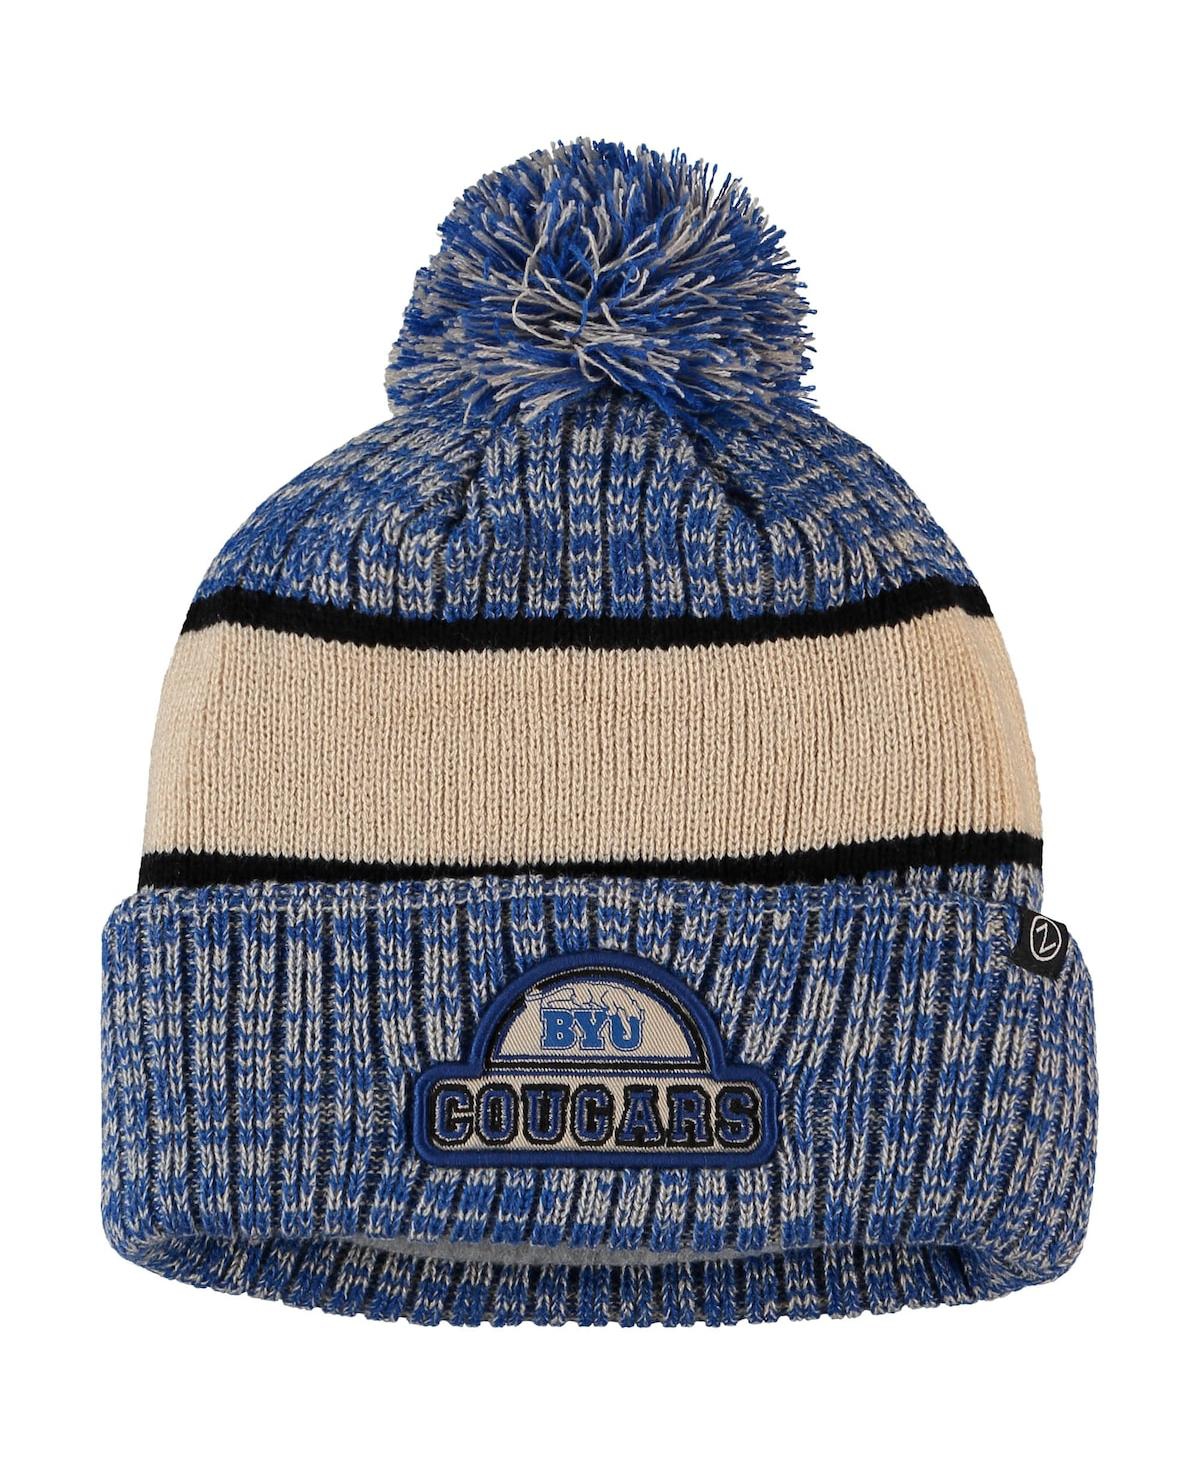 ZEPHYR MEN'S ZEPHYR ROYAL AND CREAM BYU COUGARS BRIGHTON CUFFED KNIT HAT WITH POM